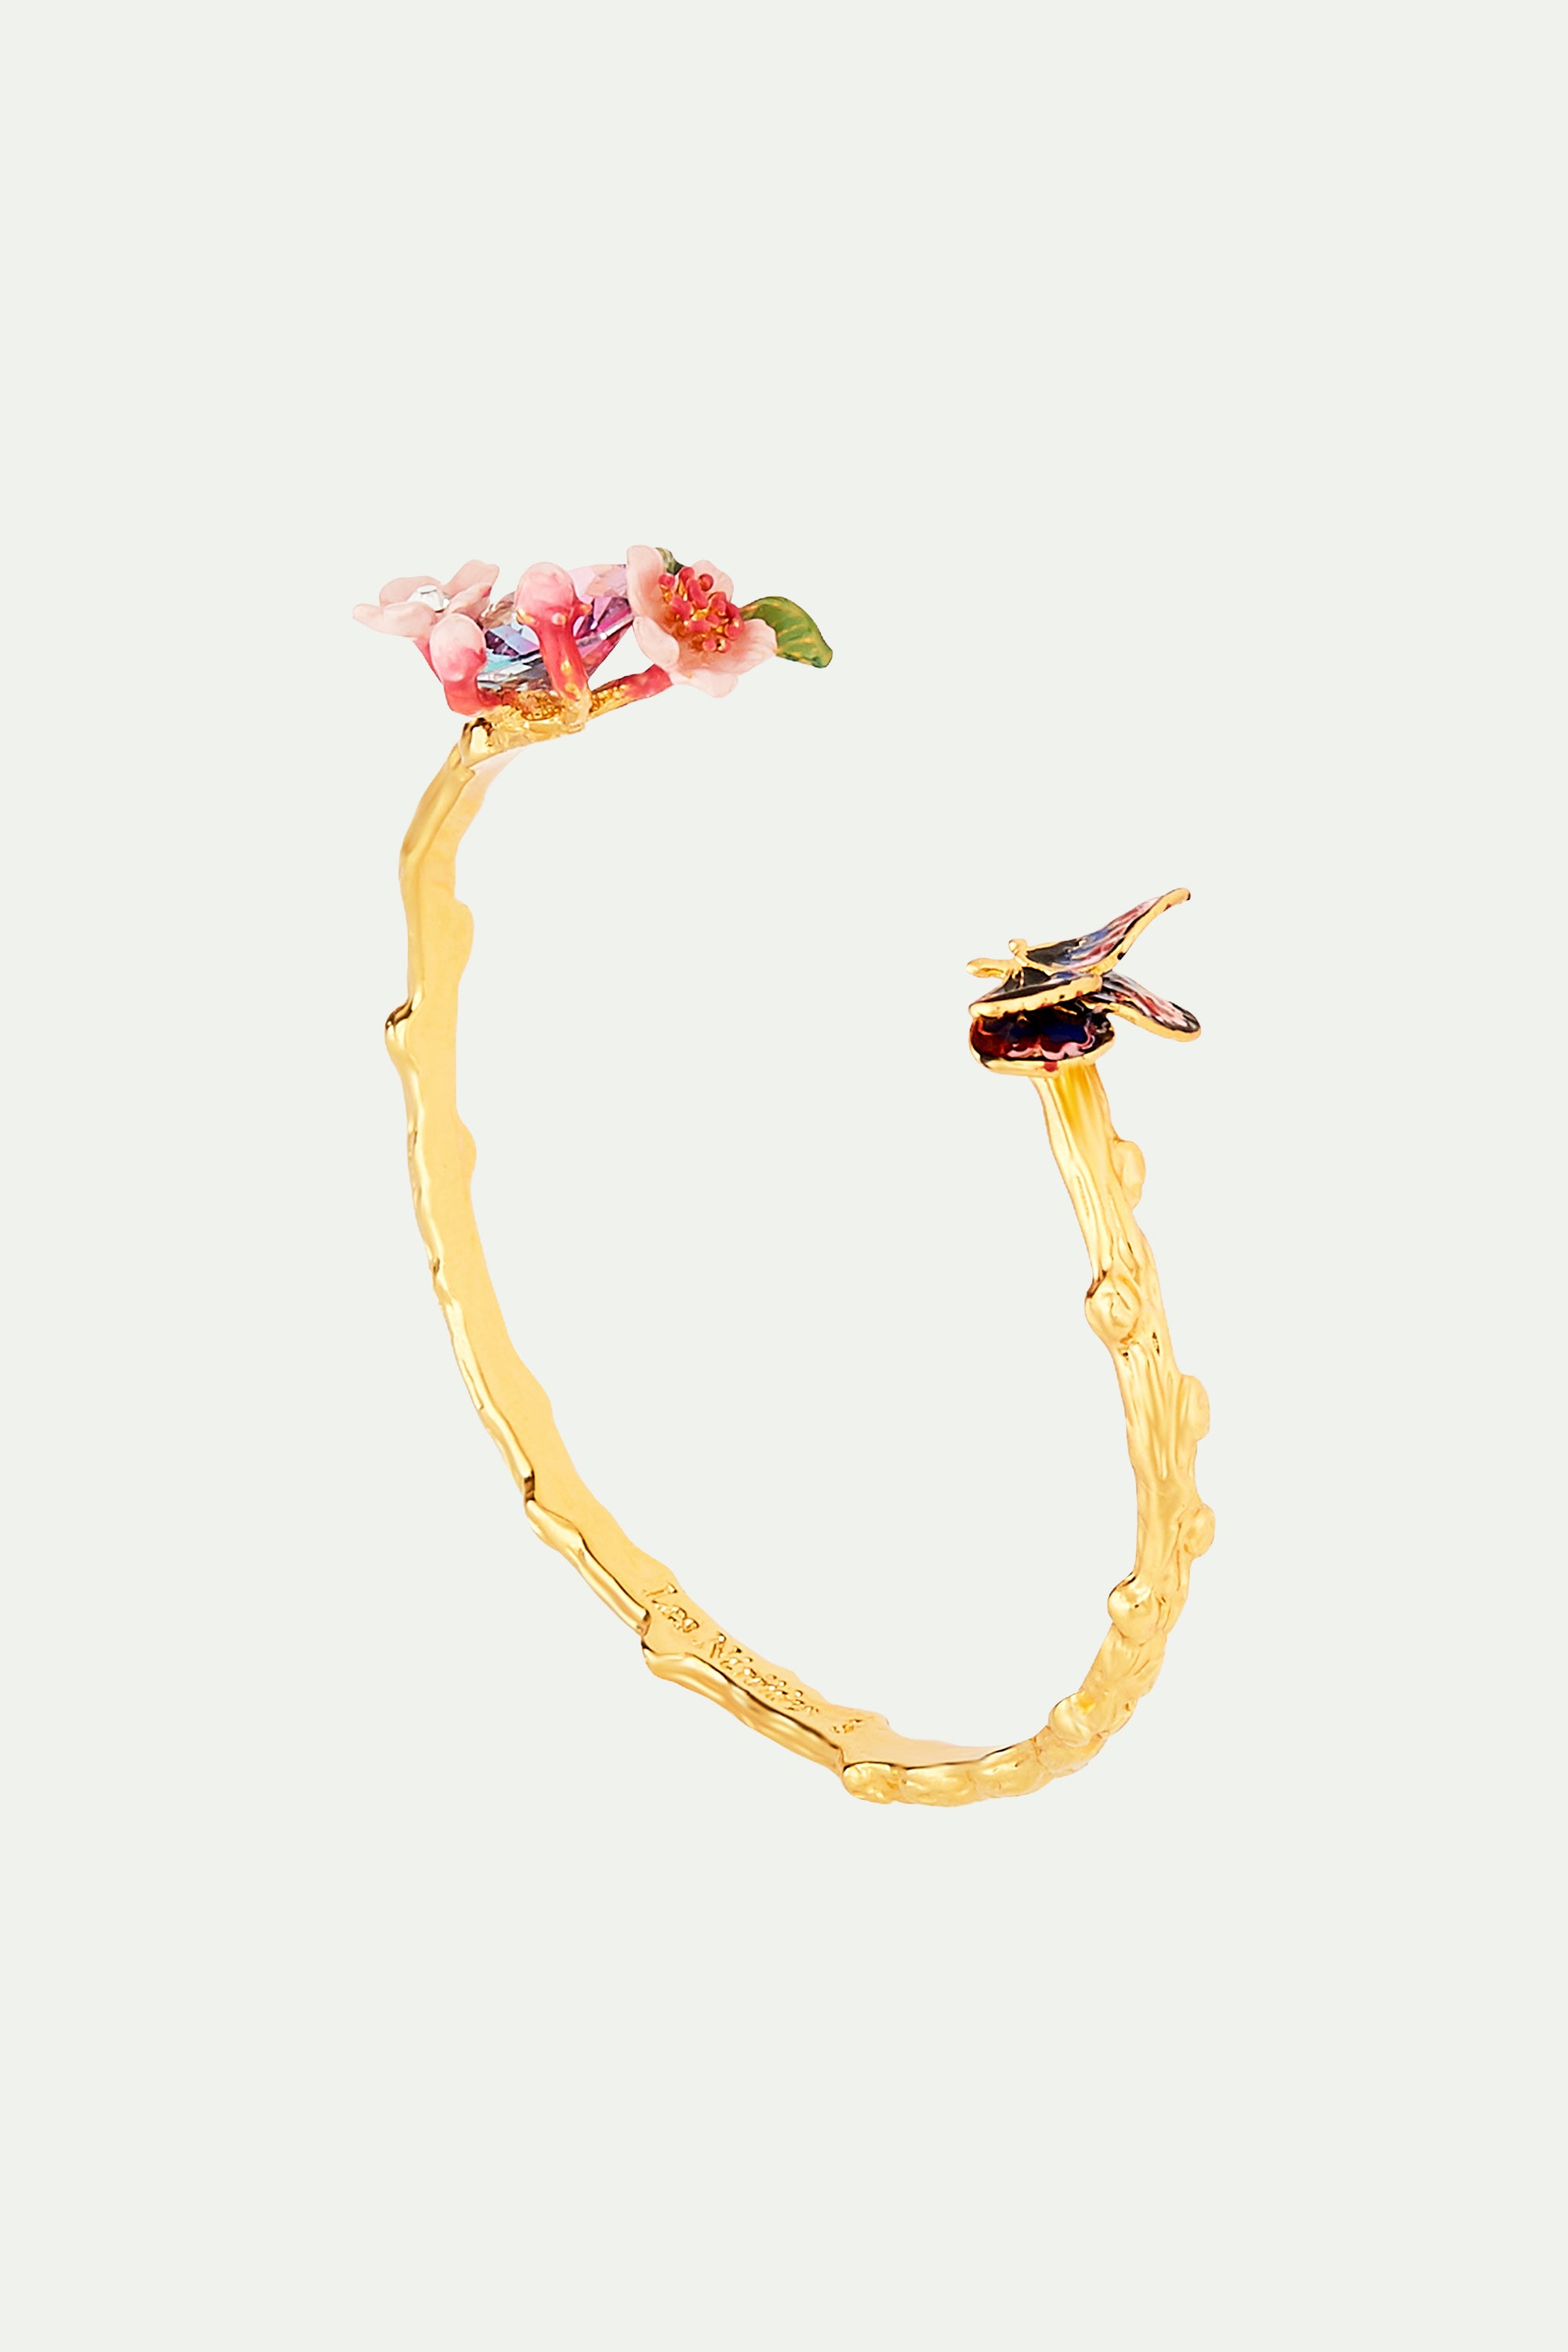 Cherry blossom and Japanese Emperor butterfly bangle